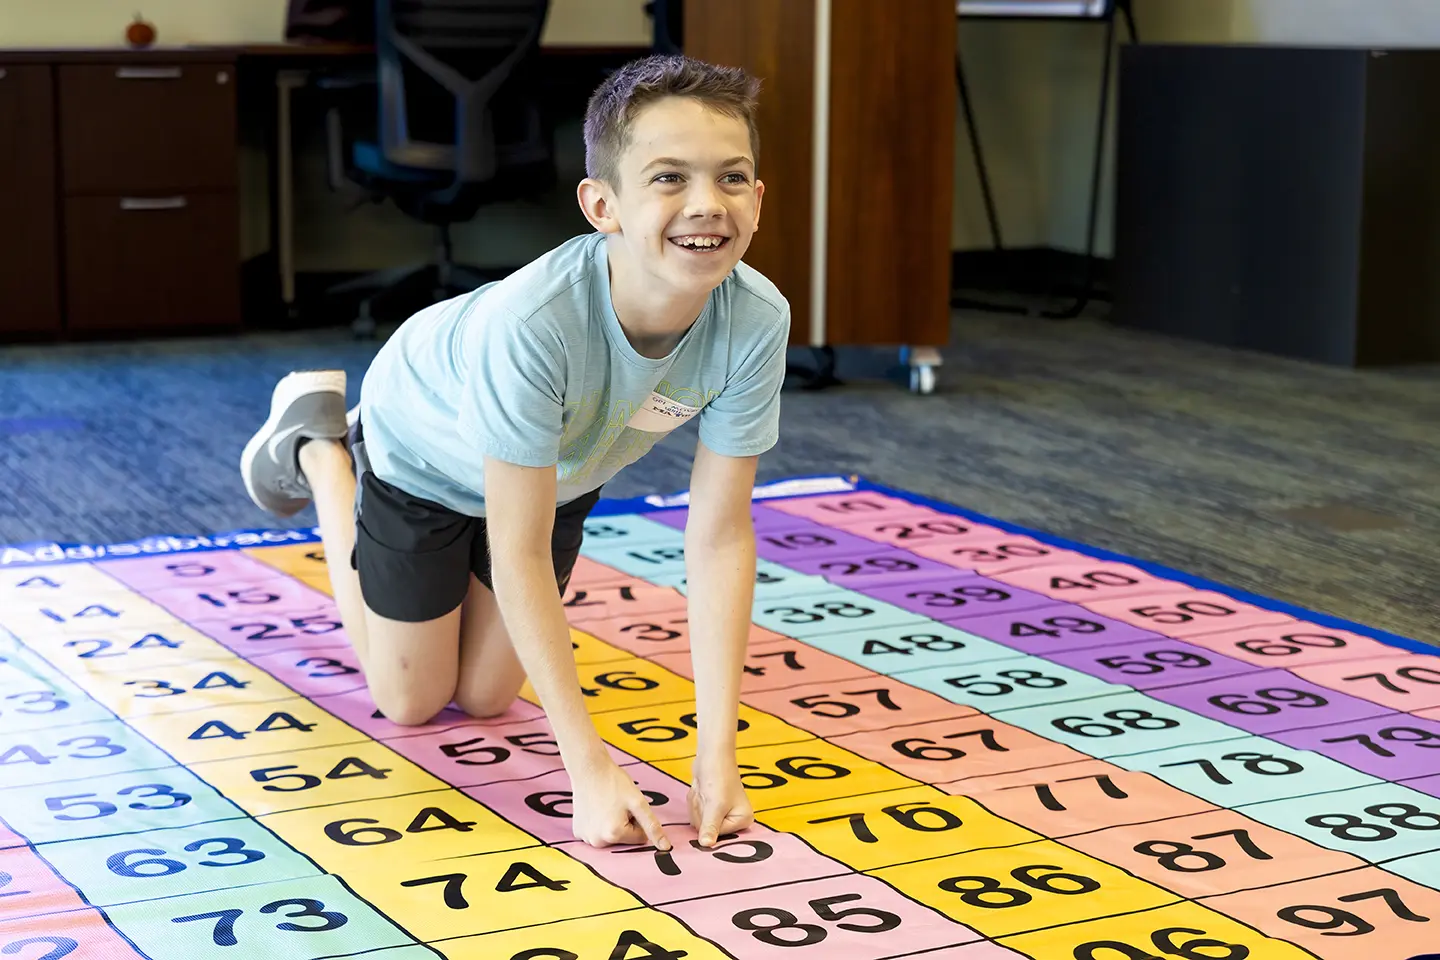 image for 4 ways ORAU's Math & Movement STEM education program will excite kids in math